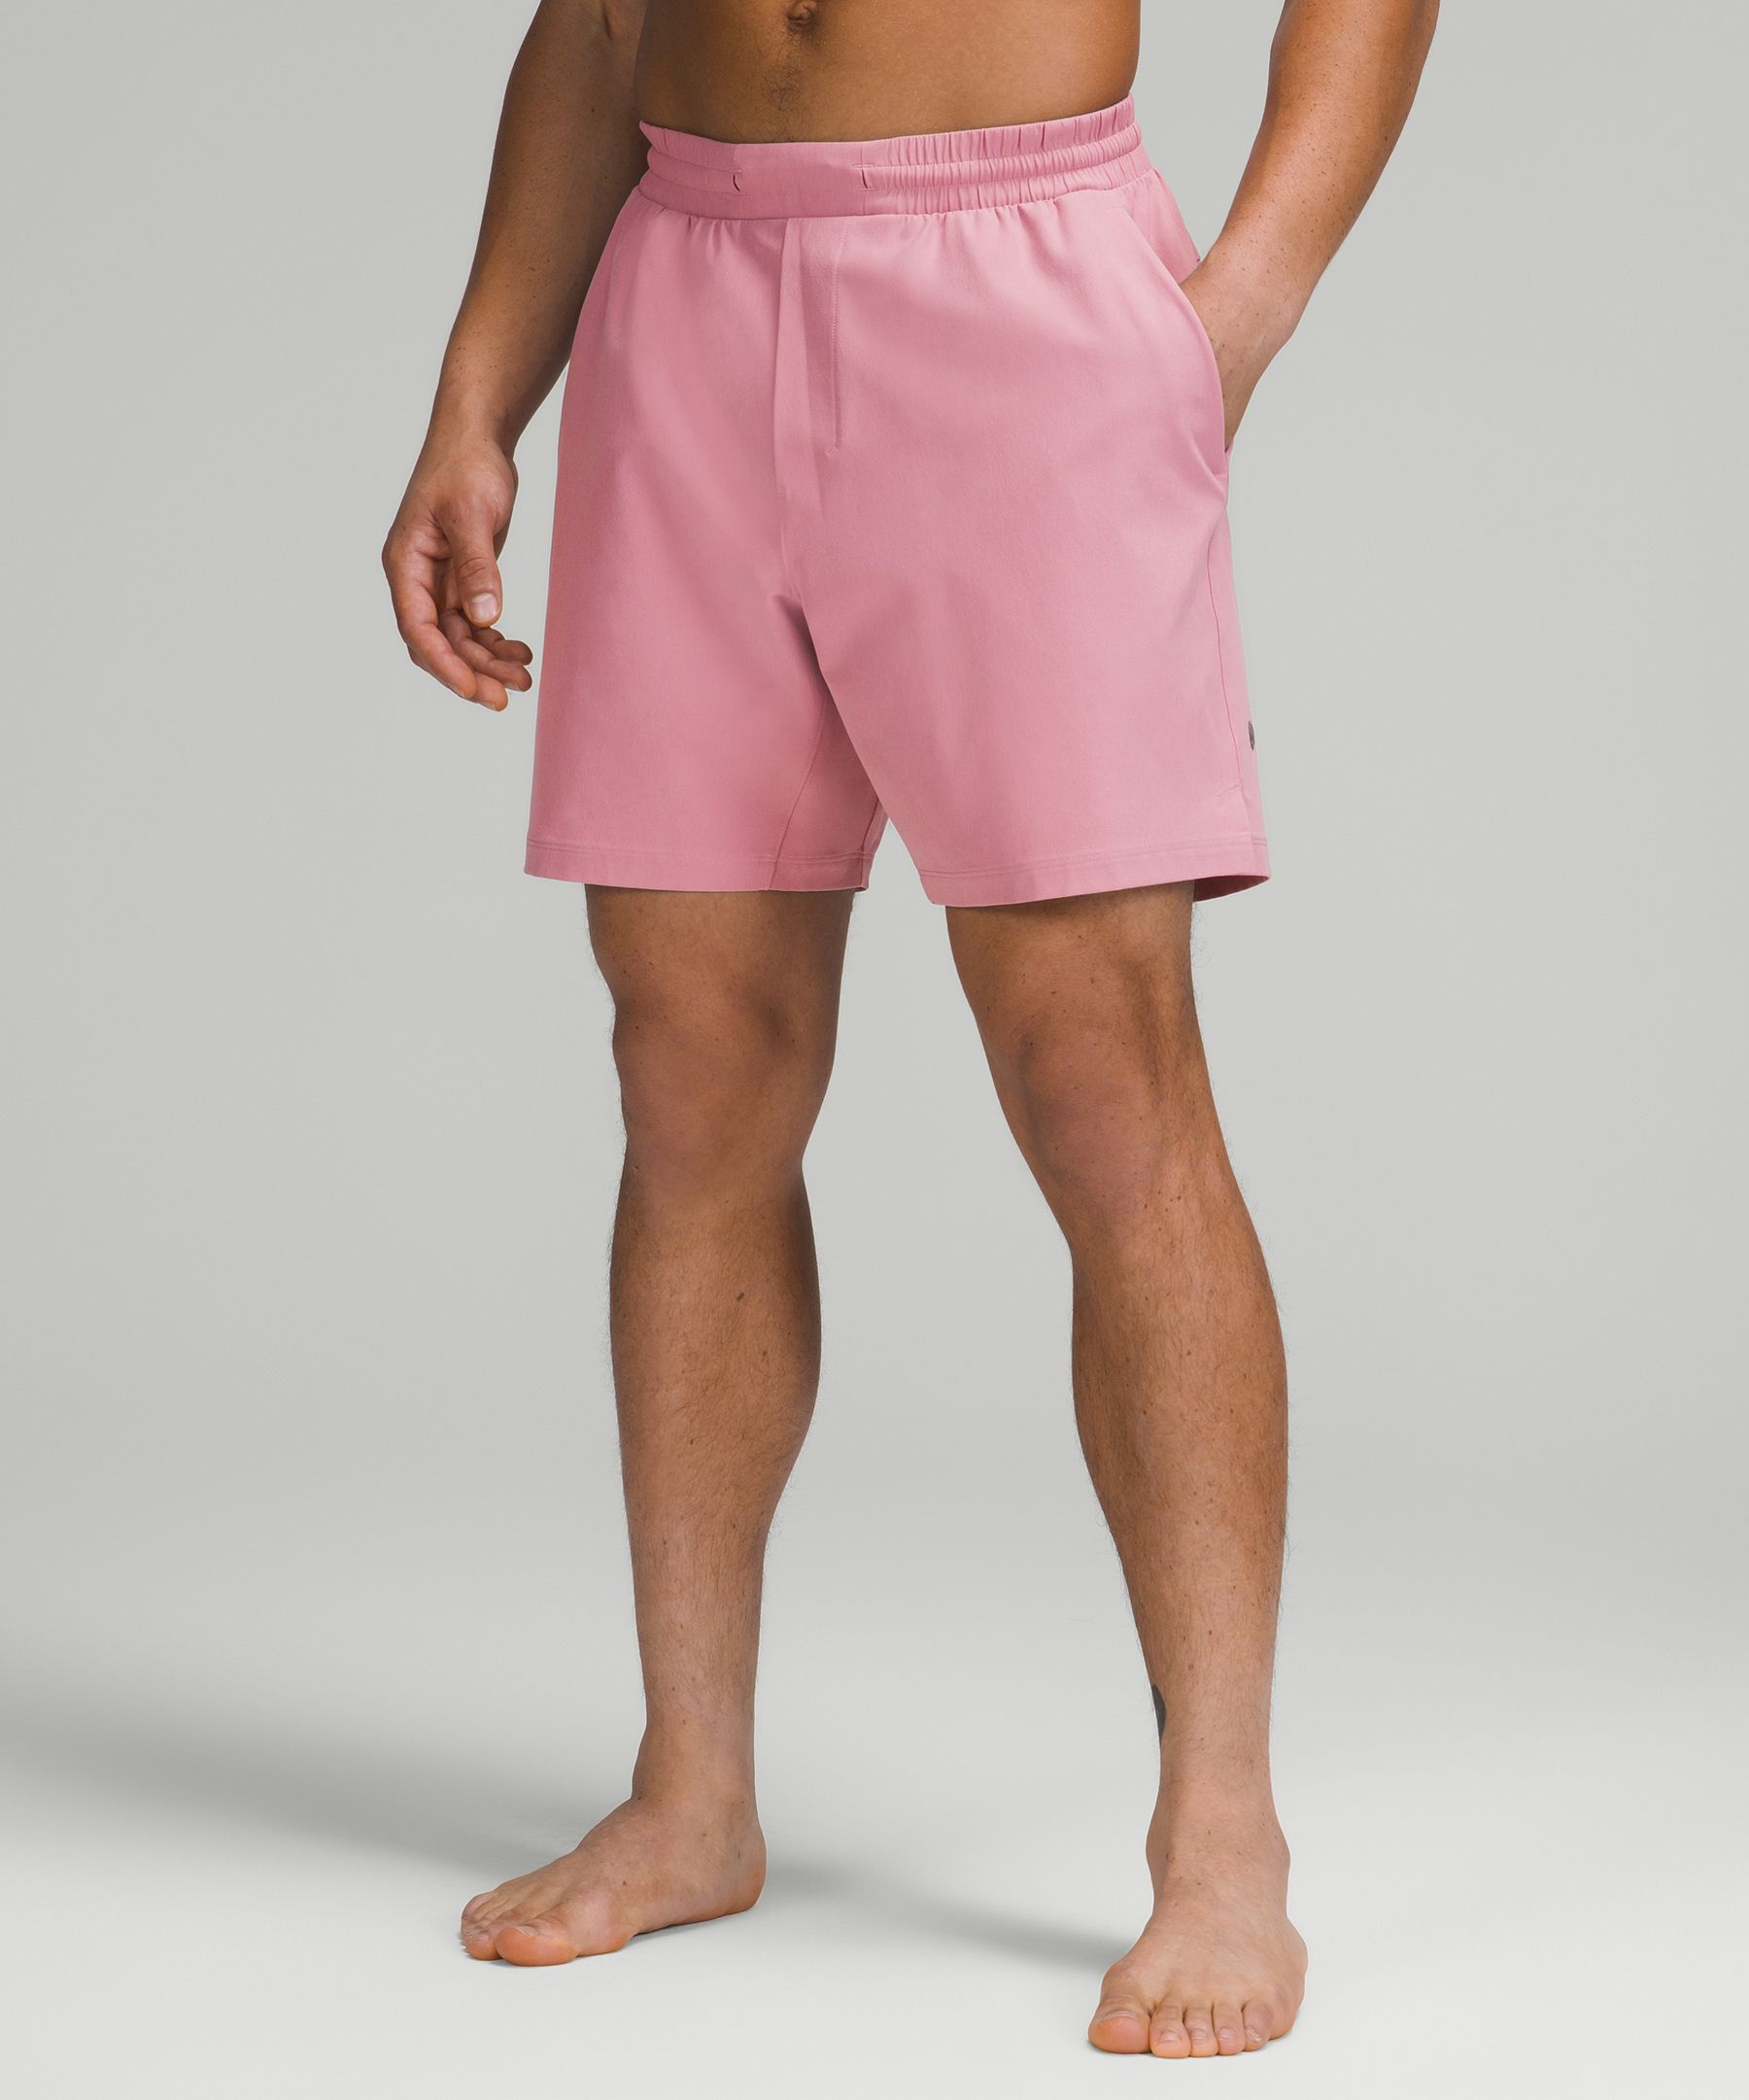 Lululemon Channel Cross Swim Shorts 7" In Pink Taupe